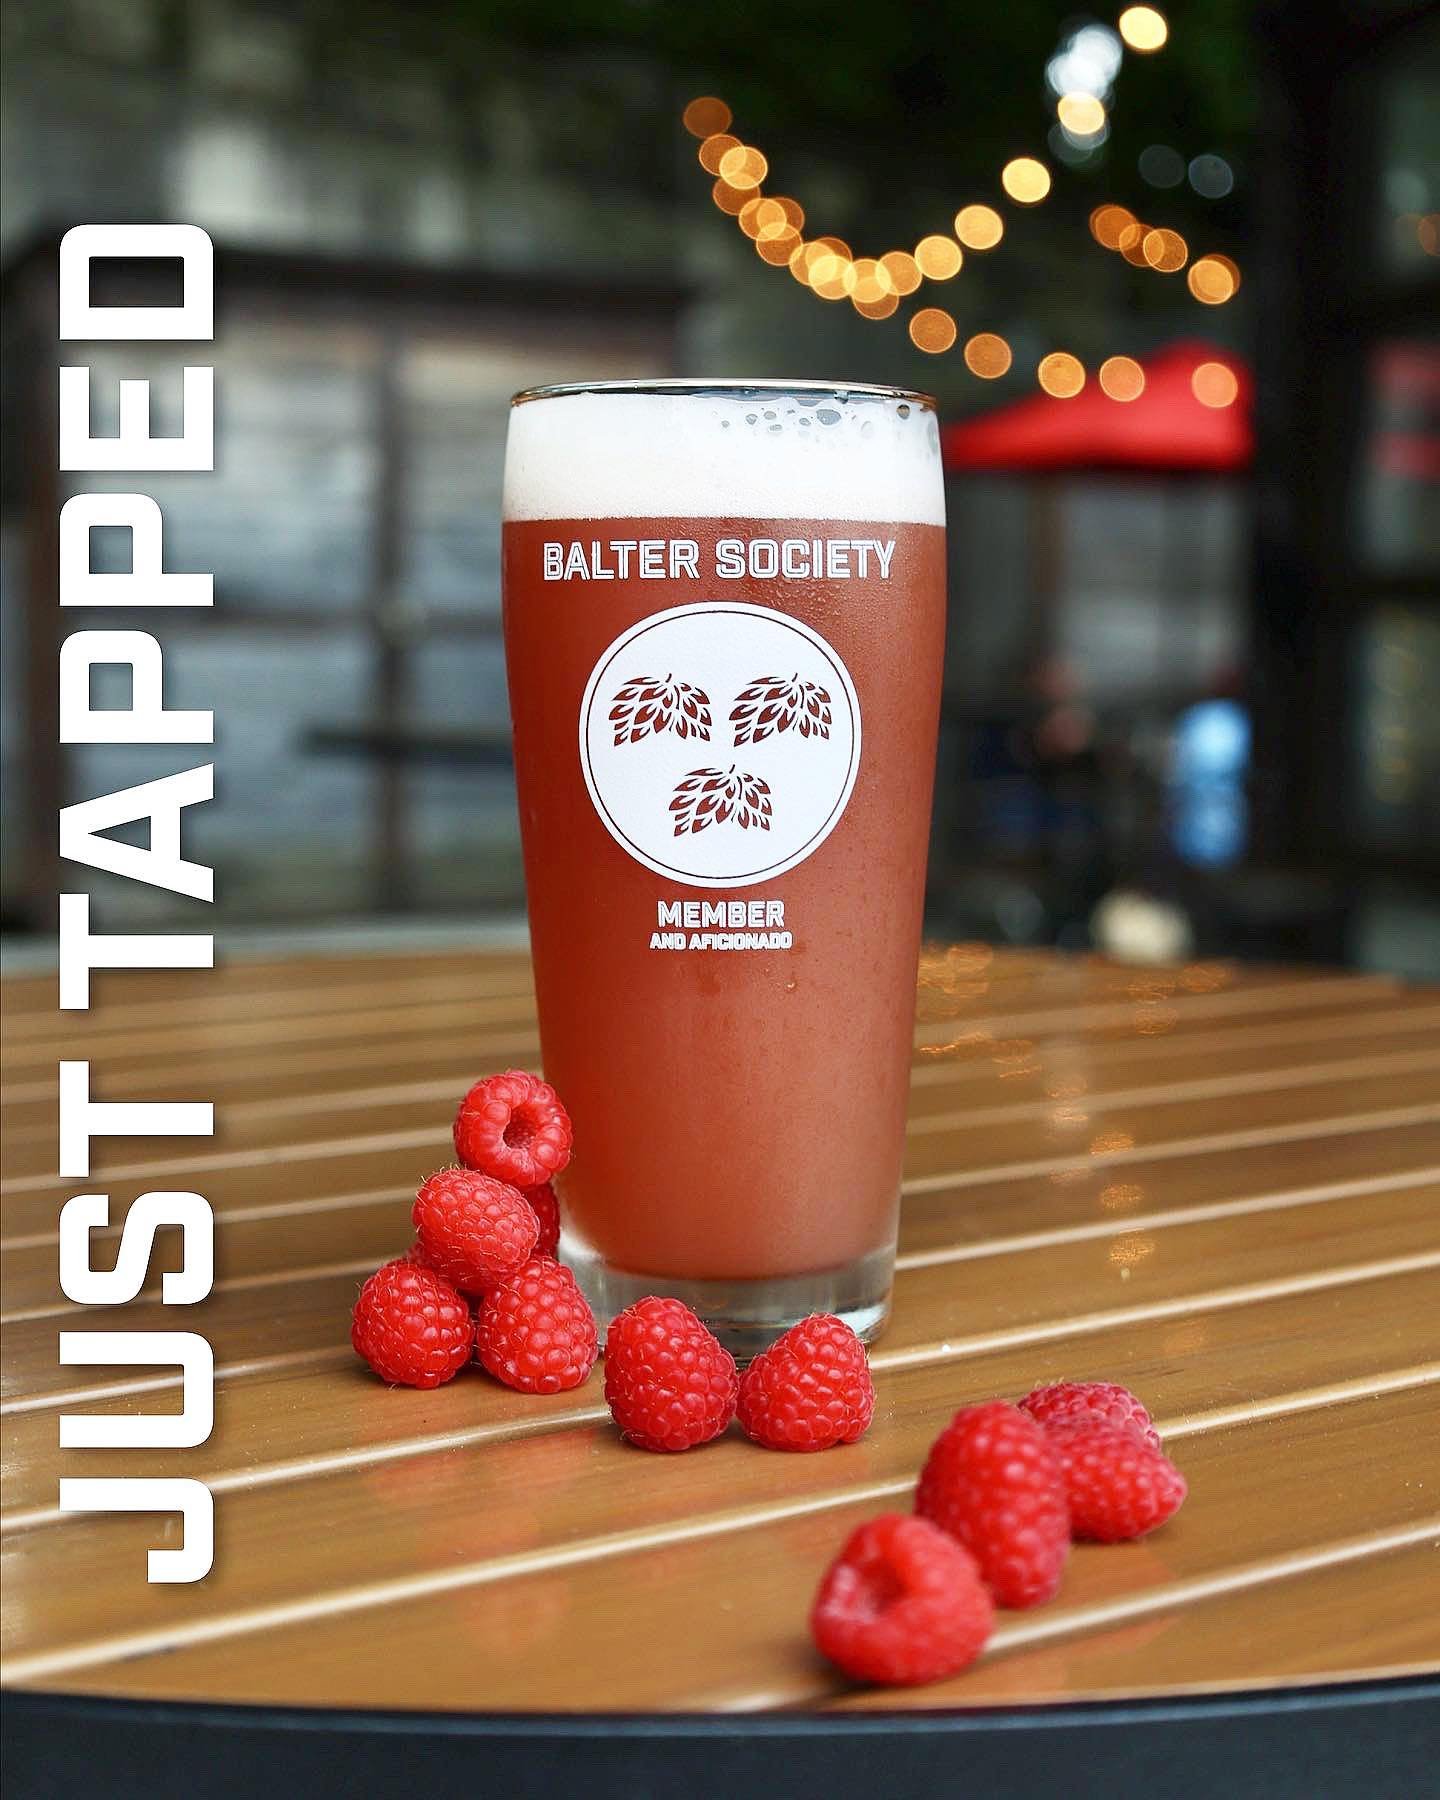 Newwww beer is here! JUST TAPPED. Raspberry Kolsch!🍻

It&rsquo;s berry good&hellip;. Don&rsquo;t believe us?😏 Try it for yourself. Get it before it&rsquo;s gone&hellip; or don&rsquo;t, more for us.